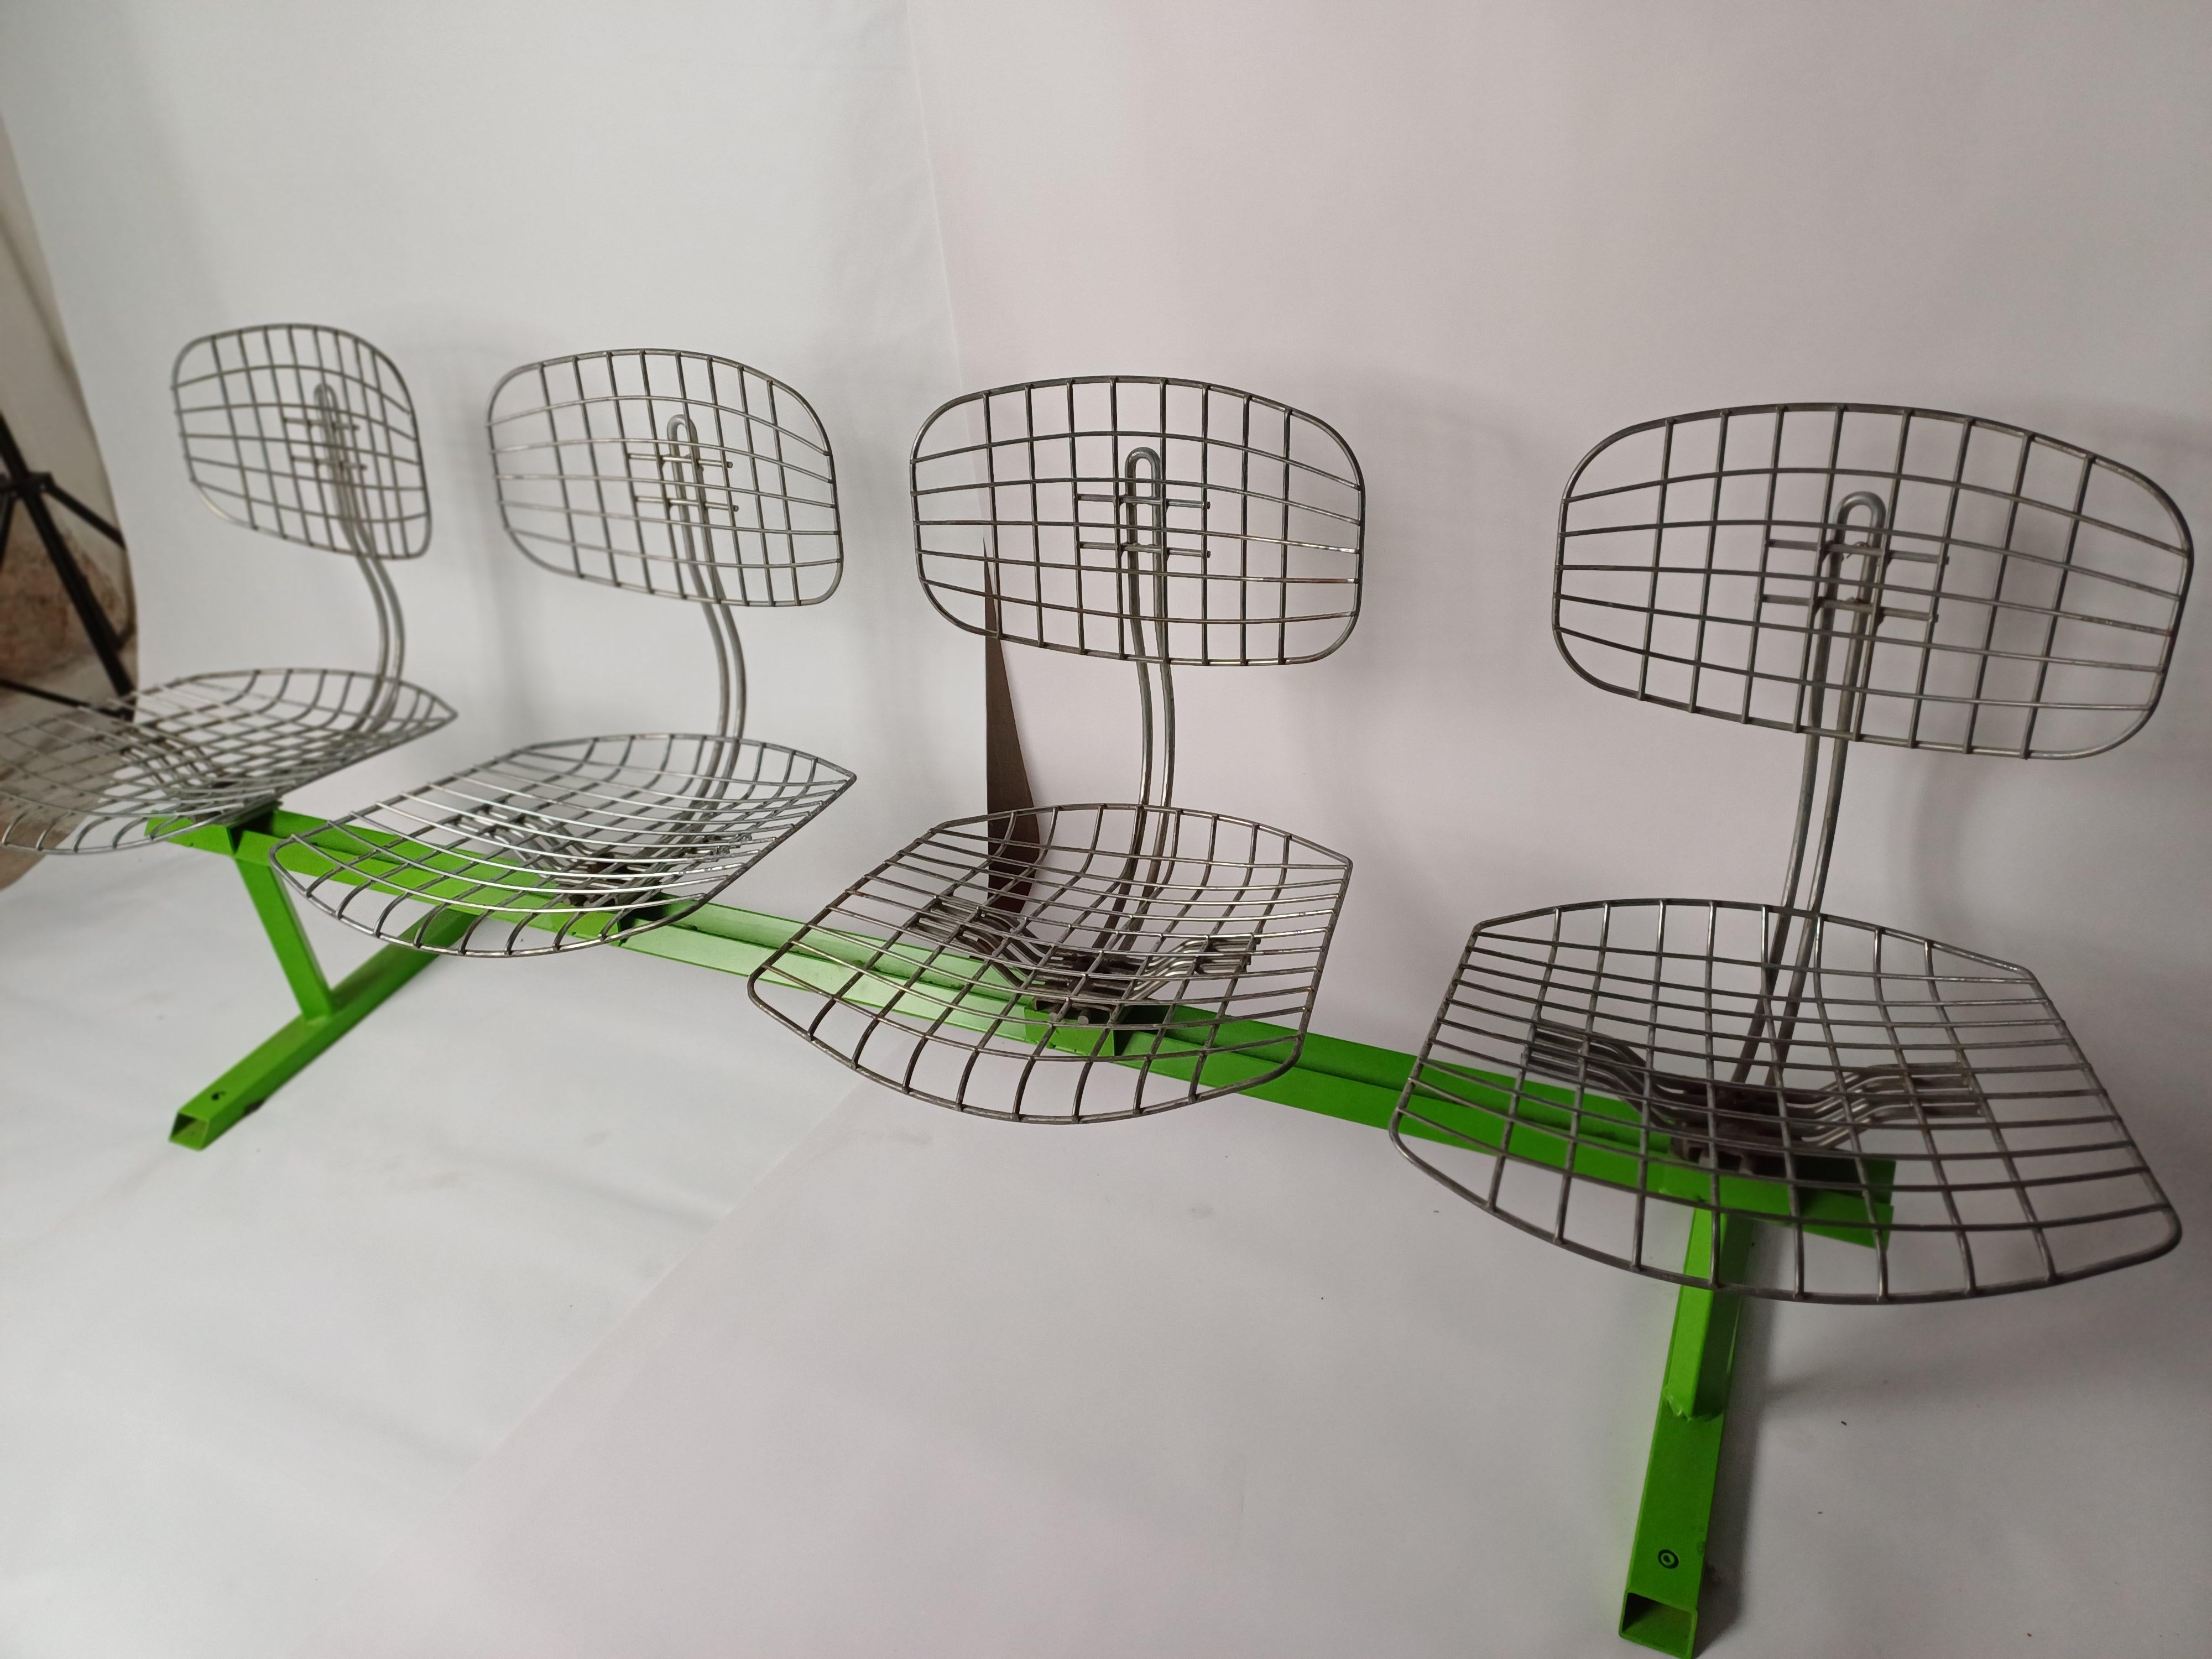 Electro-galvanized wire mesh 4-seater bench on green lacquered metal sled base from the Trellis series Teda Edition, circa 1974.
This elegant bench comes from the Georges Pompidou Center Amphitheater, Centre National D'Art et de Culture Georges